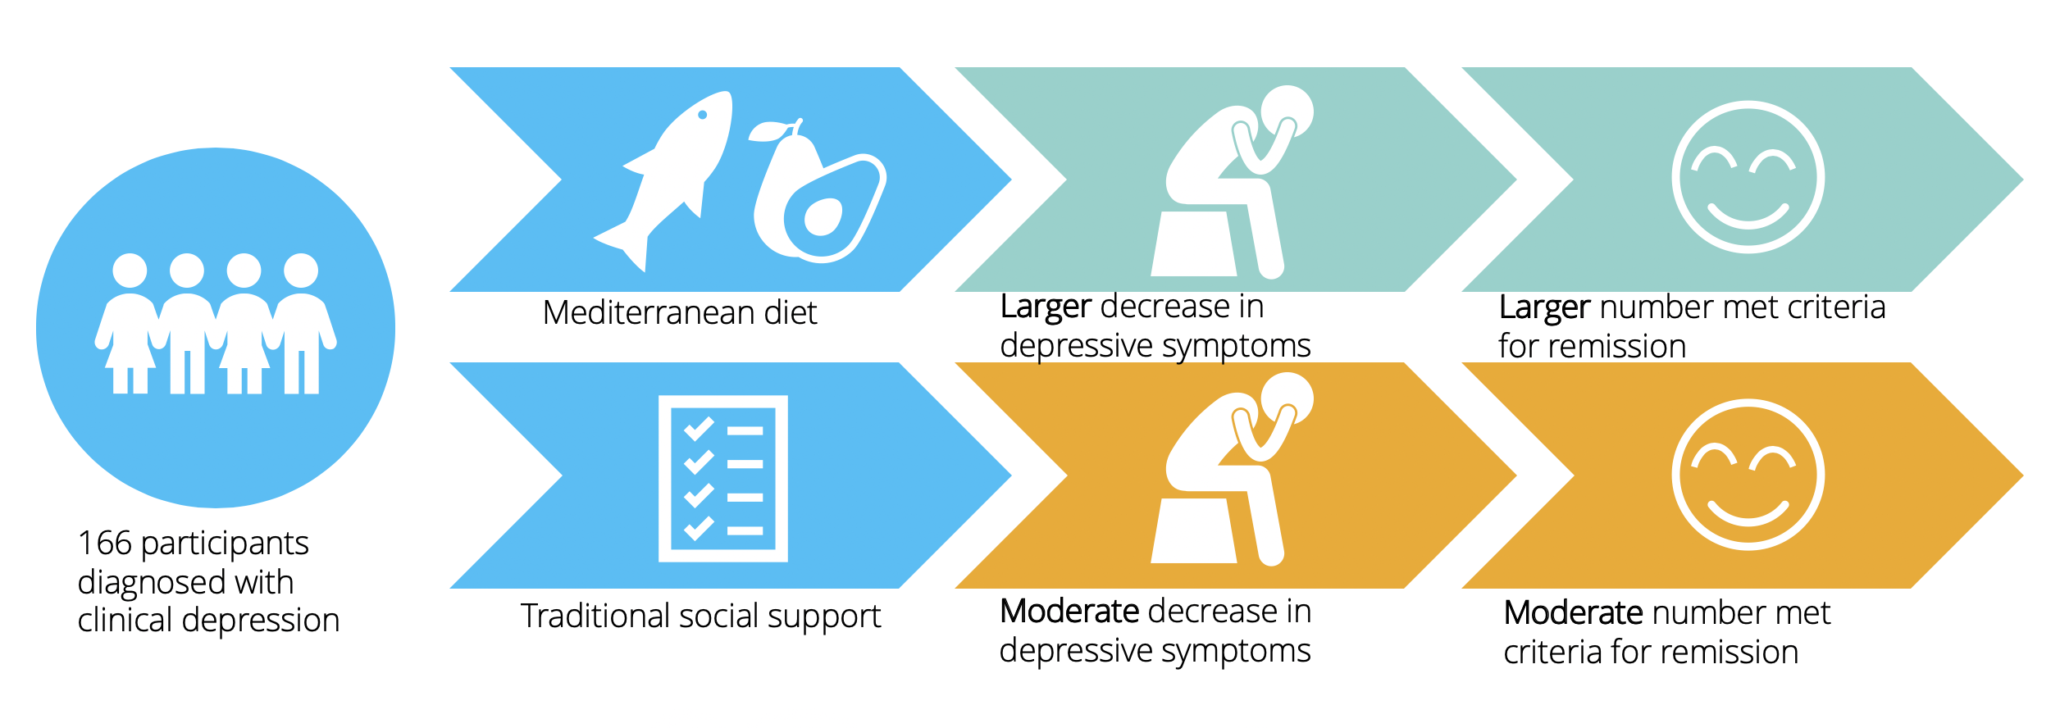 Diagram illustrating that more people placed on a mediterranean diet vs standard social care saw a reduction in depressive symptoms.